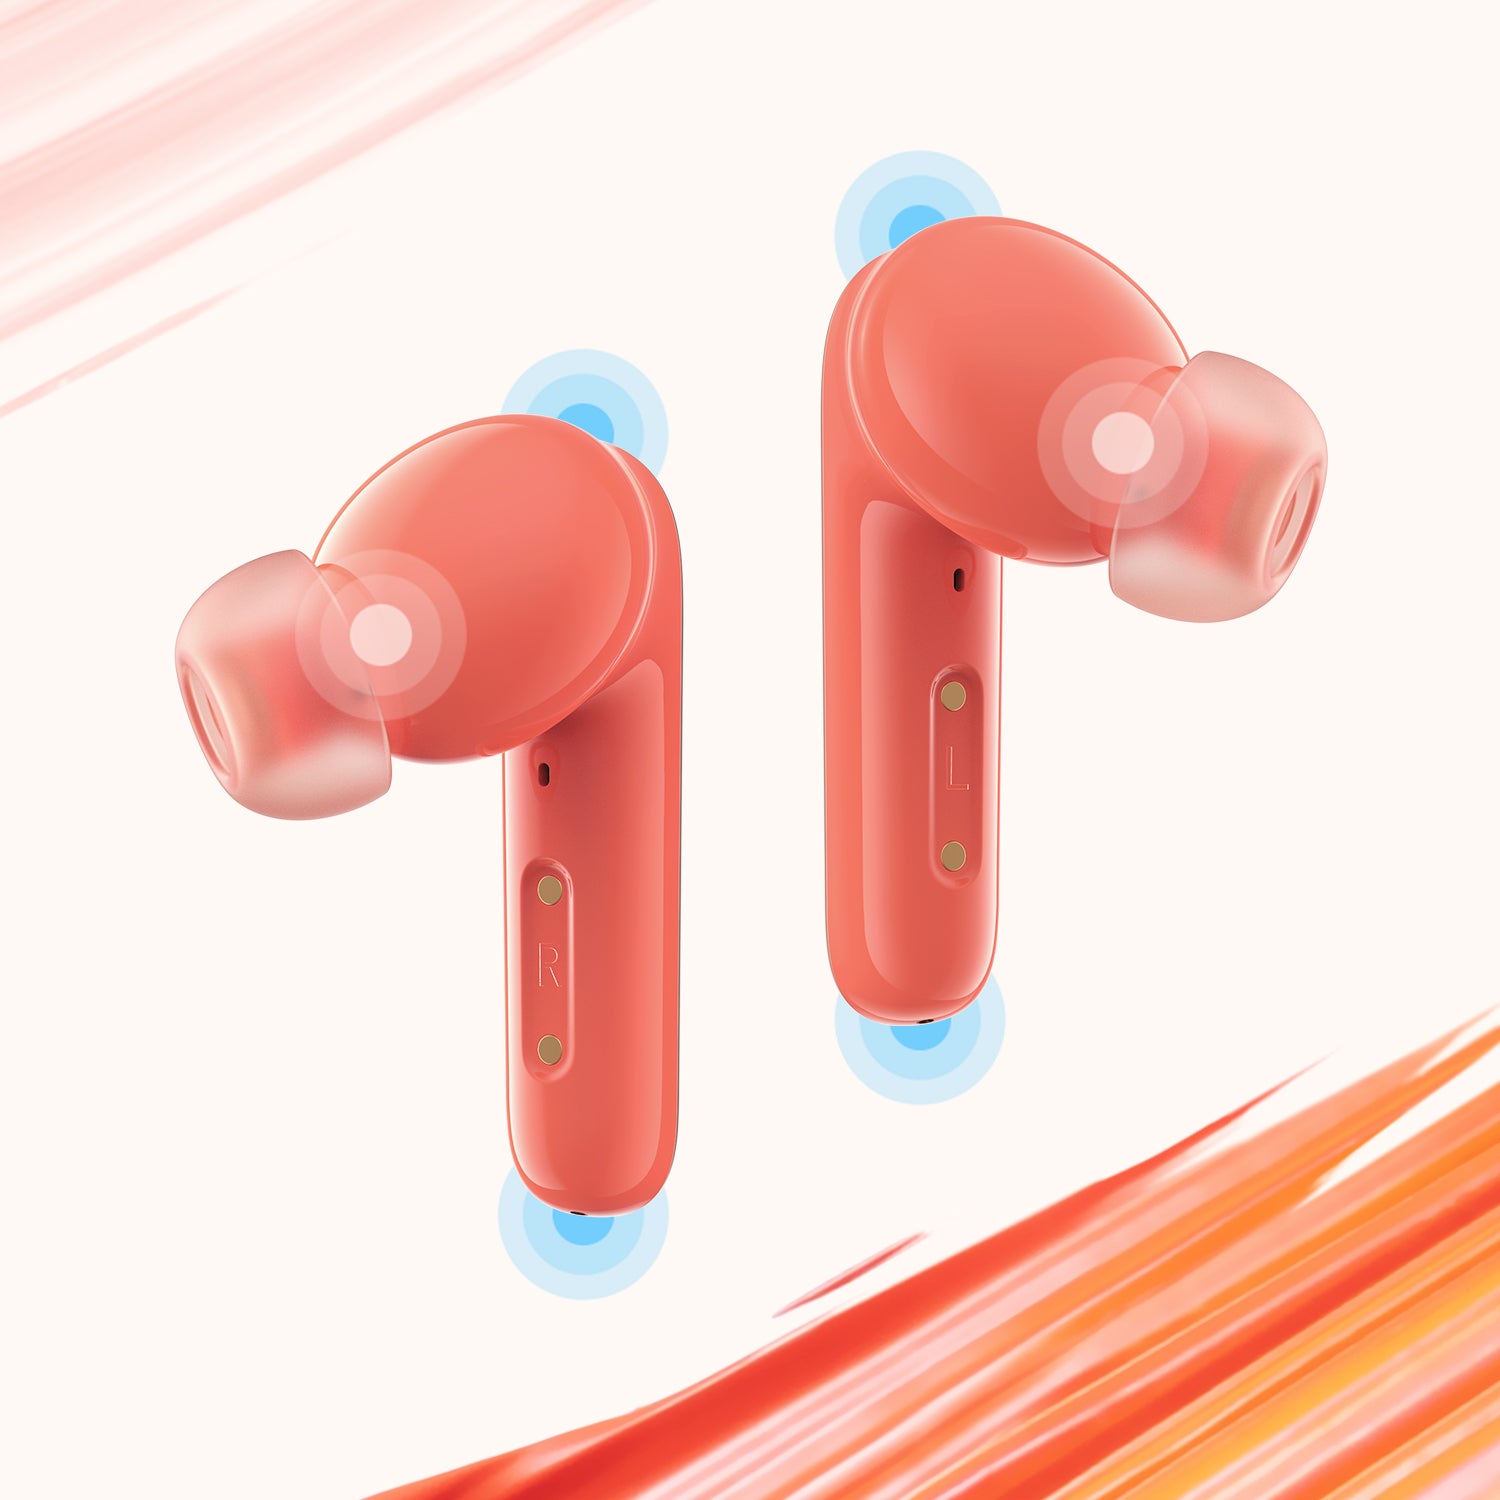 Anker Soundcore Life P3 Bluetooth In-Ear Headphones - Coral